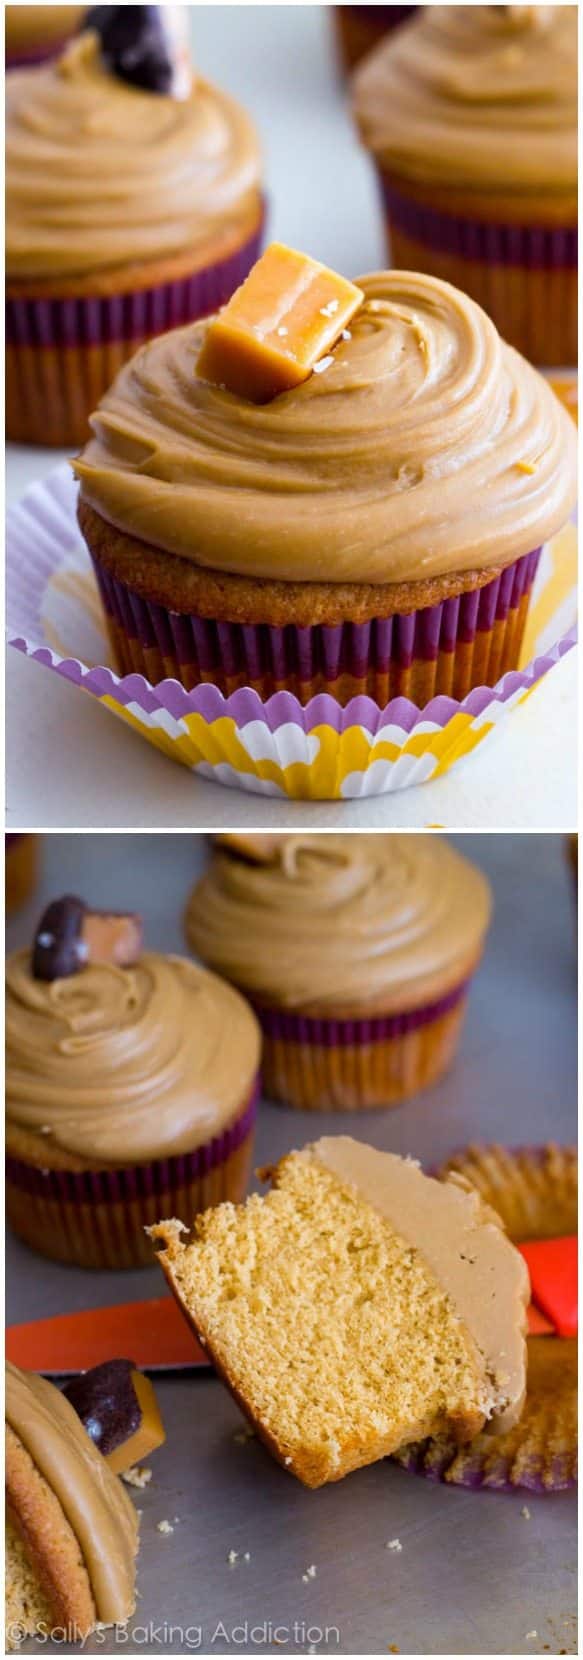 2 images of caramel cupcakes topped with salted caramel frosting and caramel candies